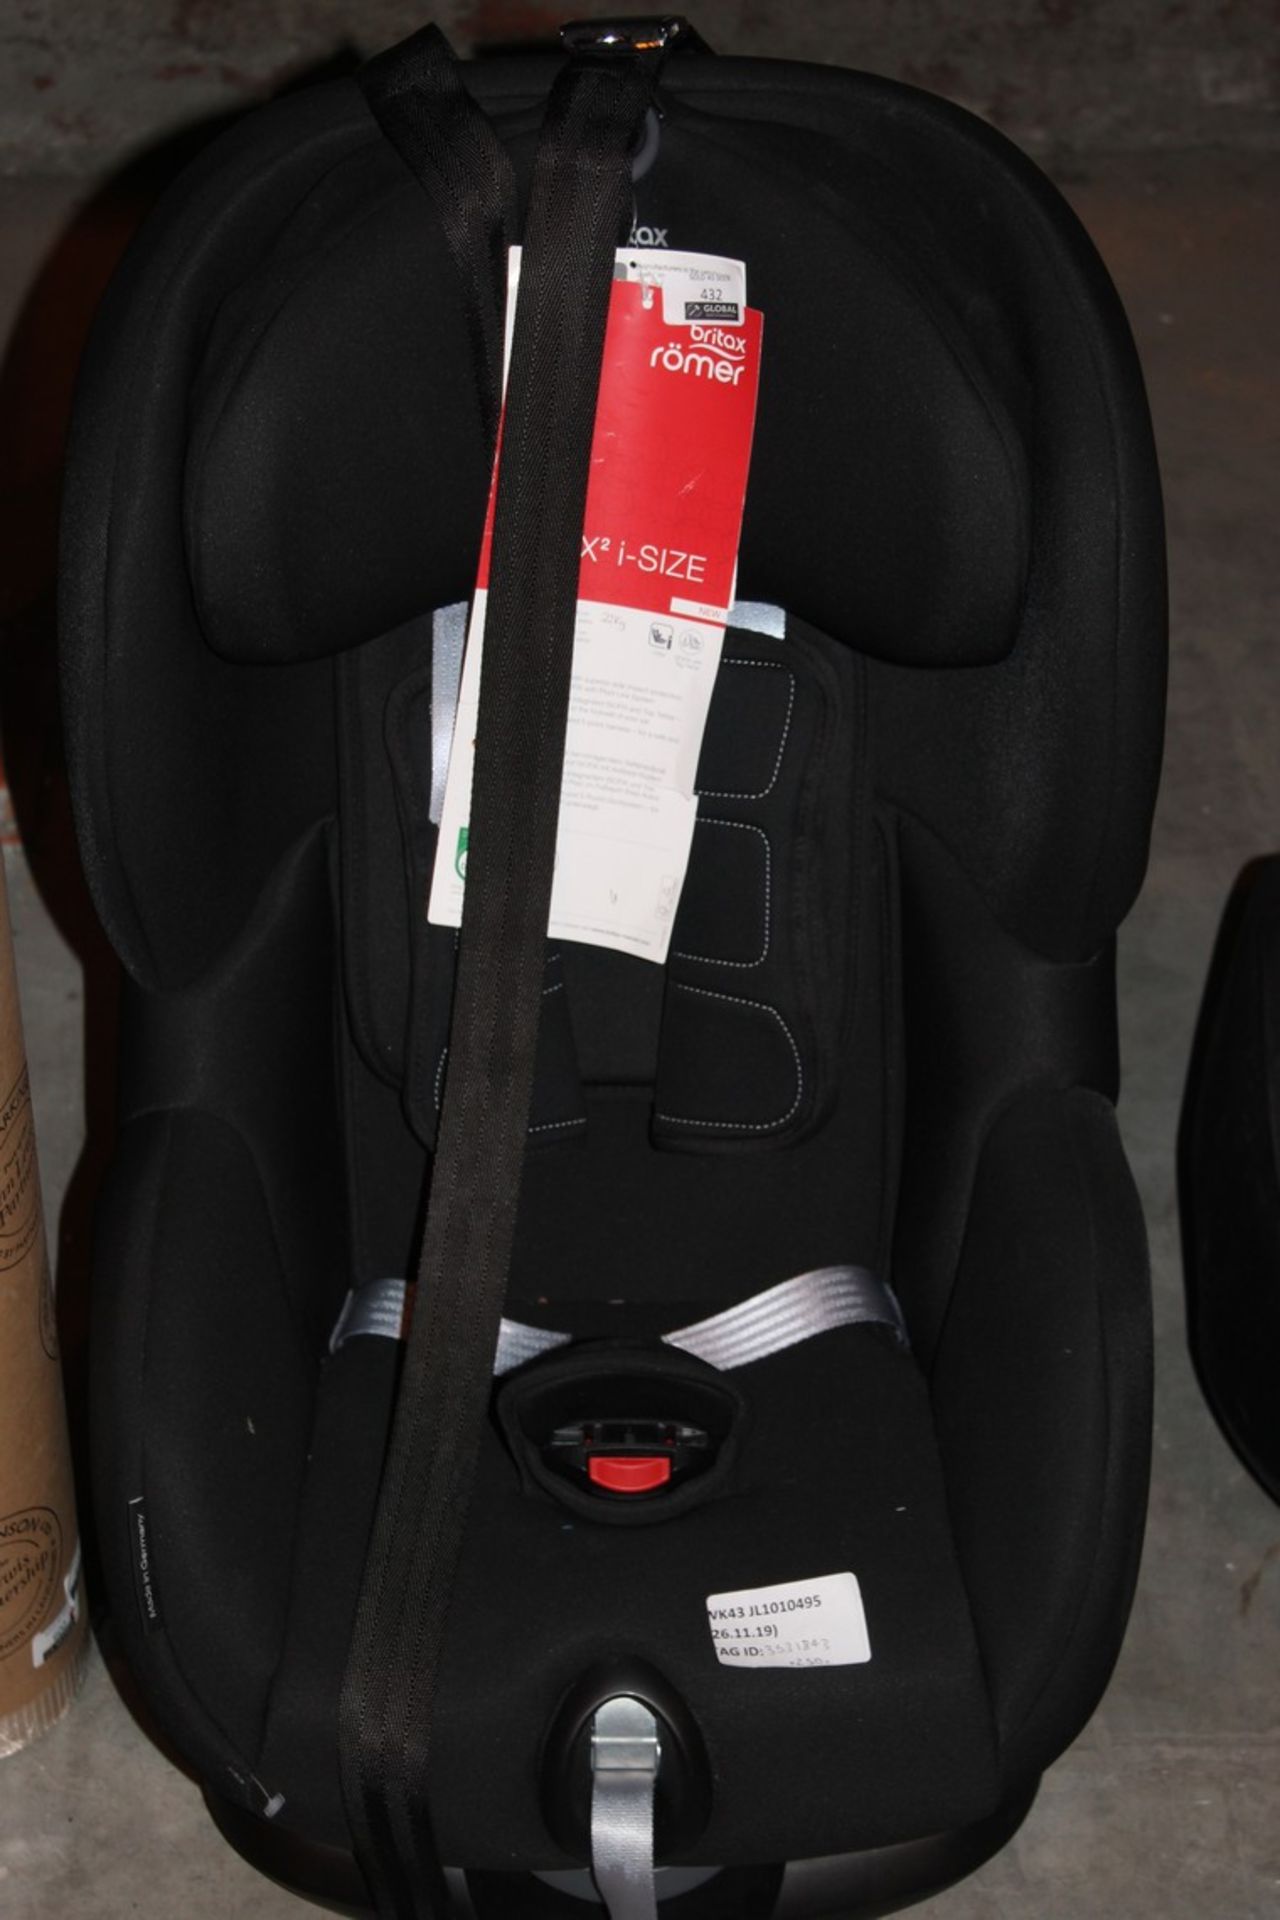 Britax Romer In Car Kids Safety Seat Isize RRP £250 (3531843) (Public Viewing and Appraisals